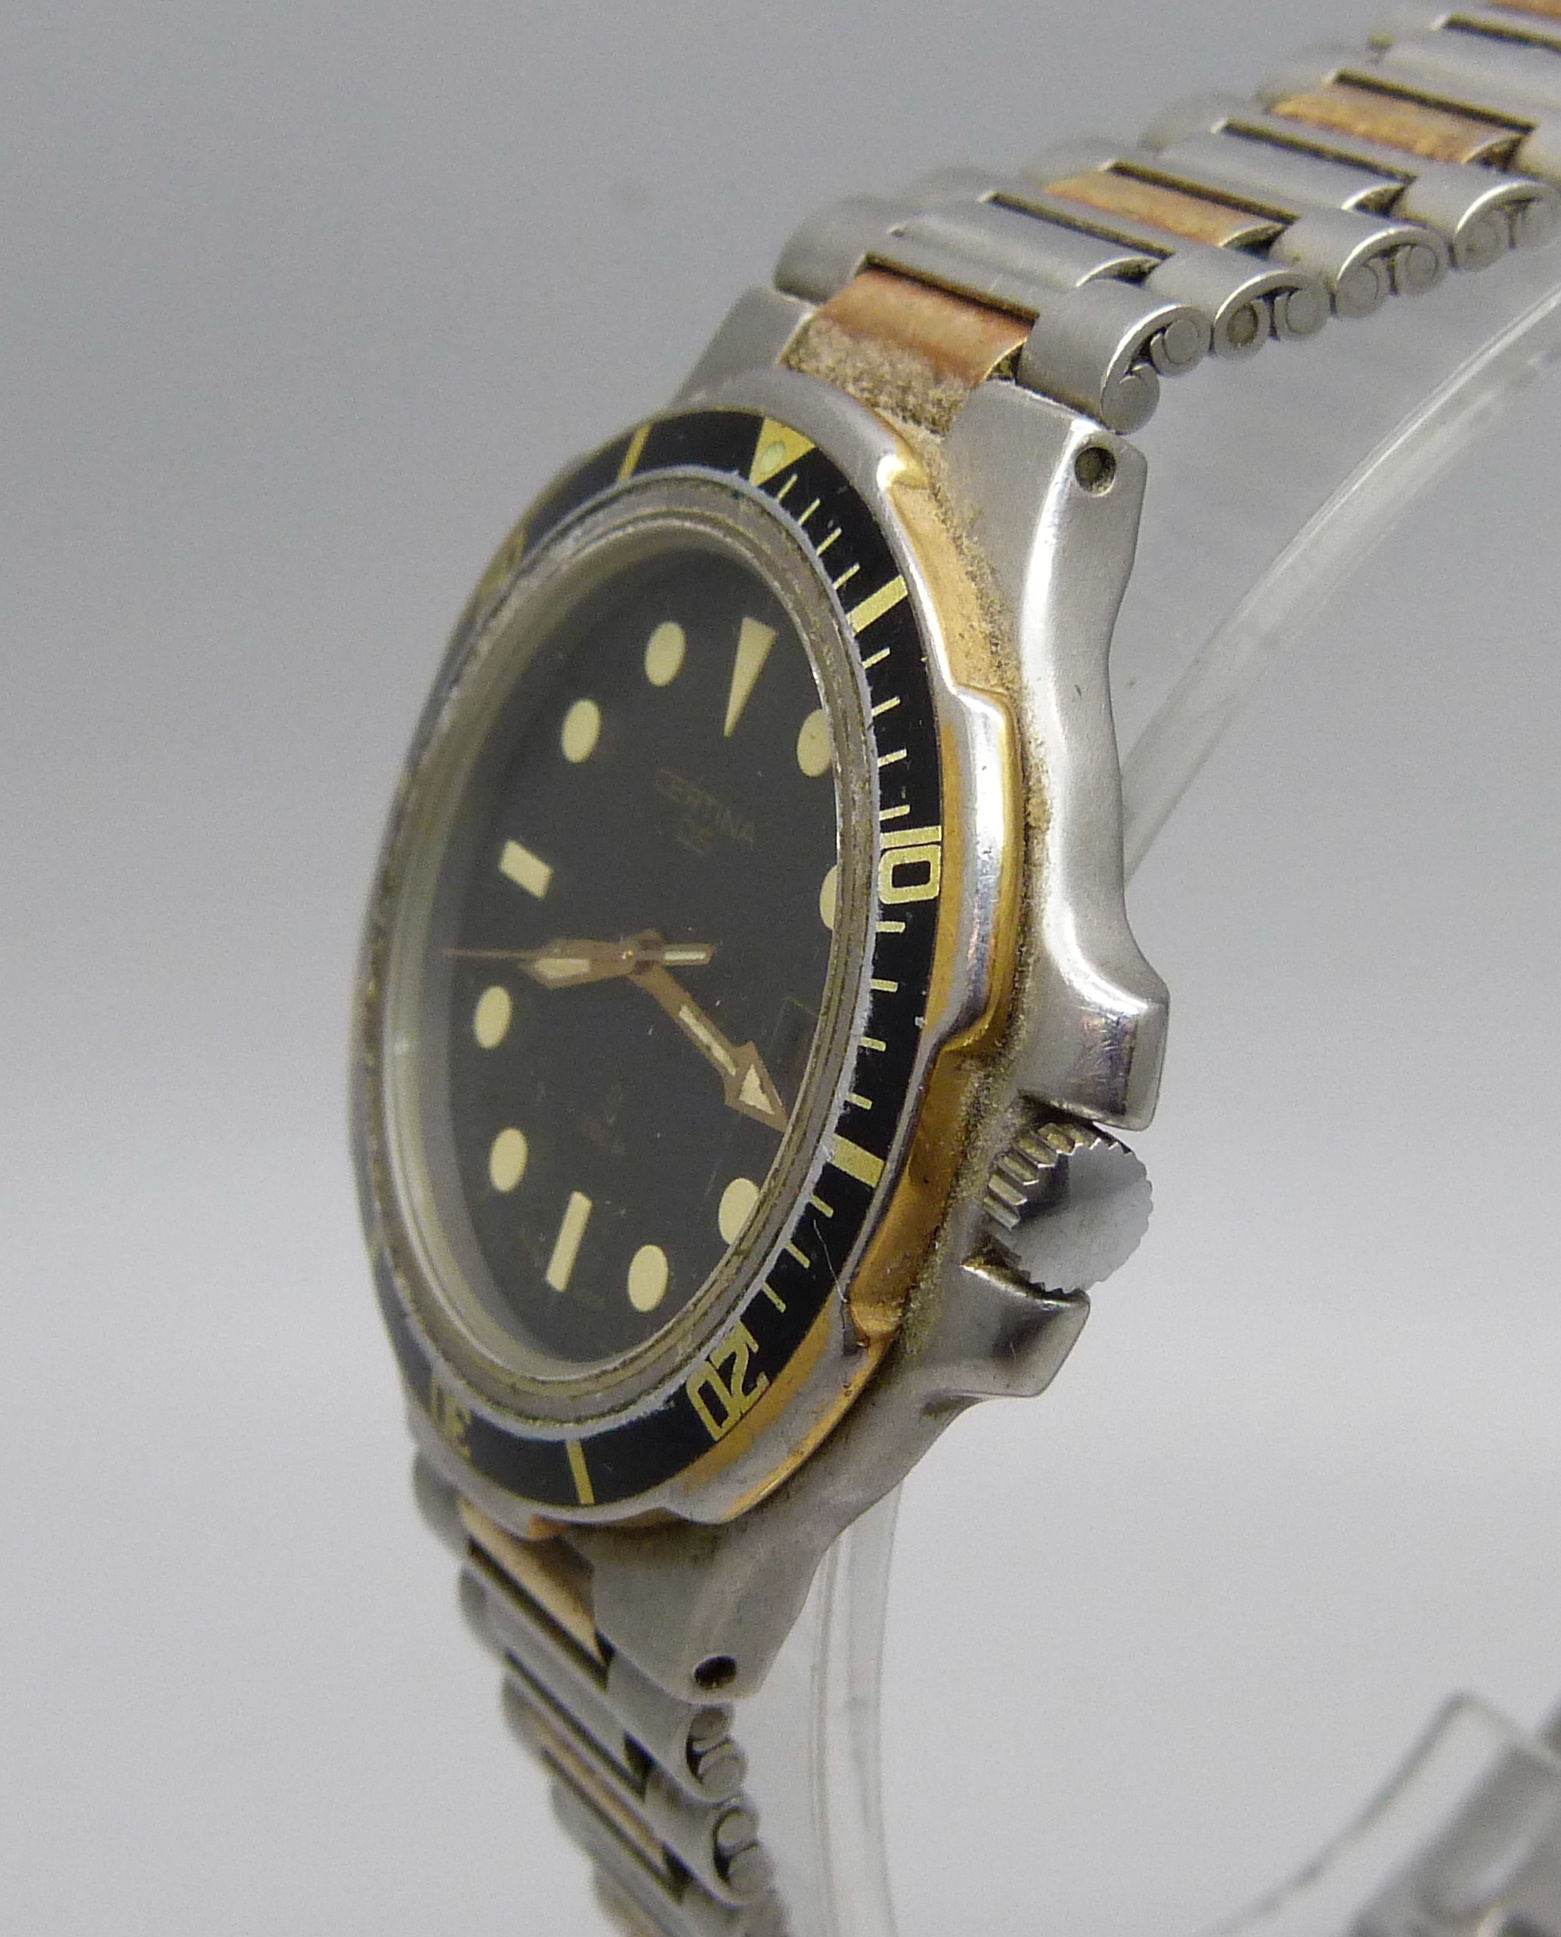 A Certina DS 200m wristwatch - Image 3 of 6